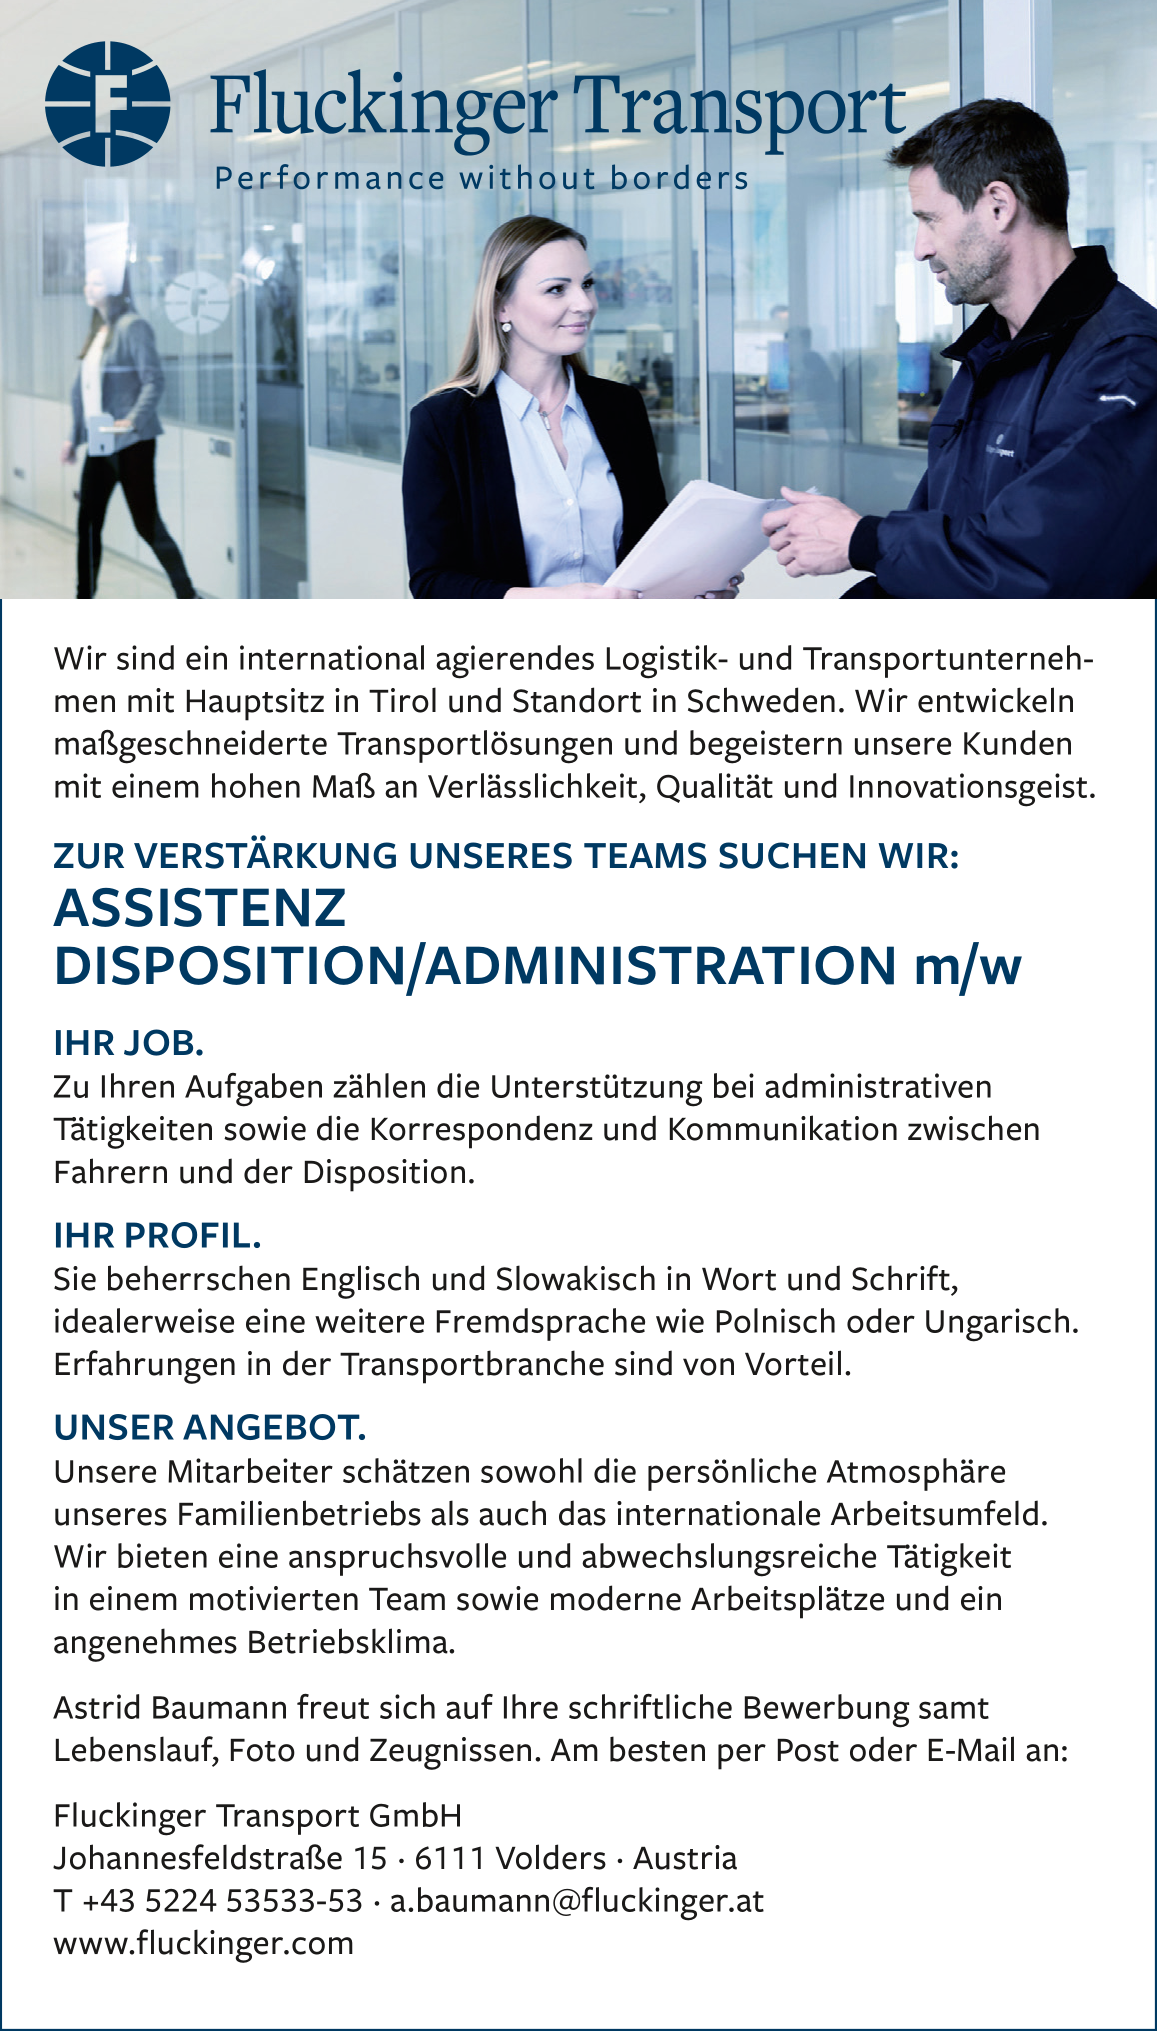 ASSISTENZ DISPOSITION/ADMINISTRATION m/w